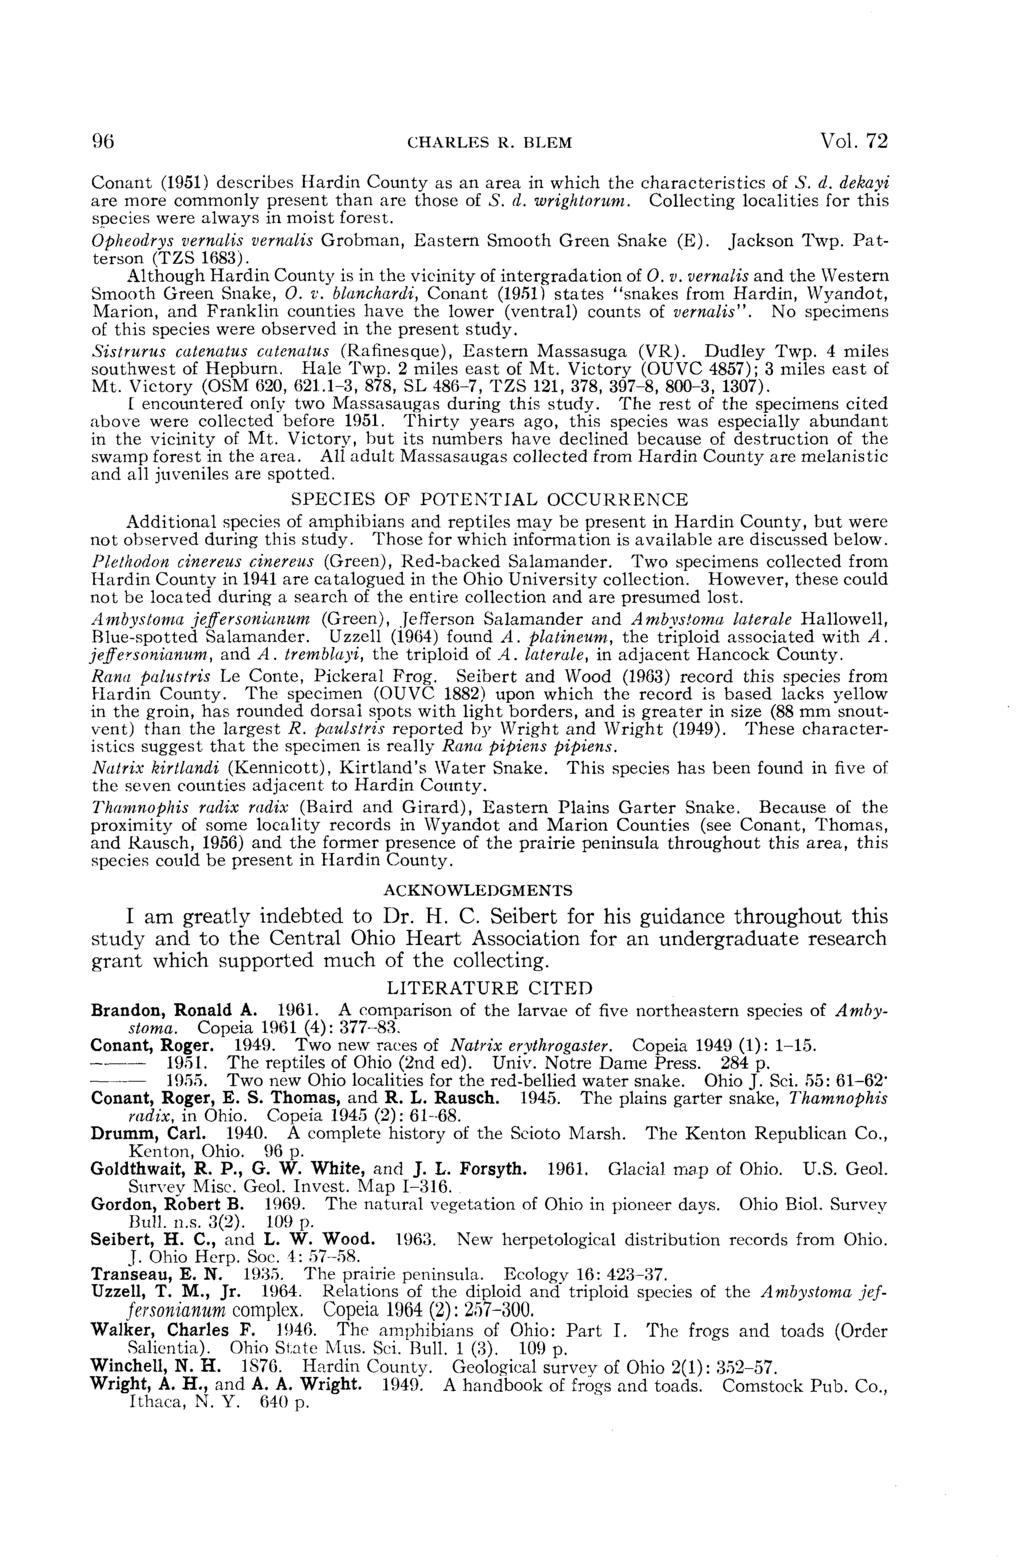 96 CHARLES R. BLEM Vol. 72 Conant (1951) describes Hardin County as an area in which the characteristics of S. d. dekayi are more commonly present than are those of S. d. wrightorum.